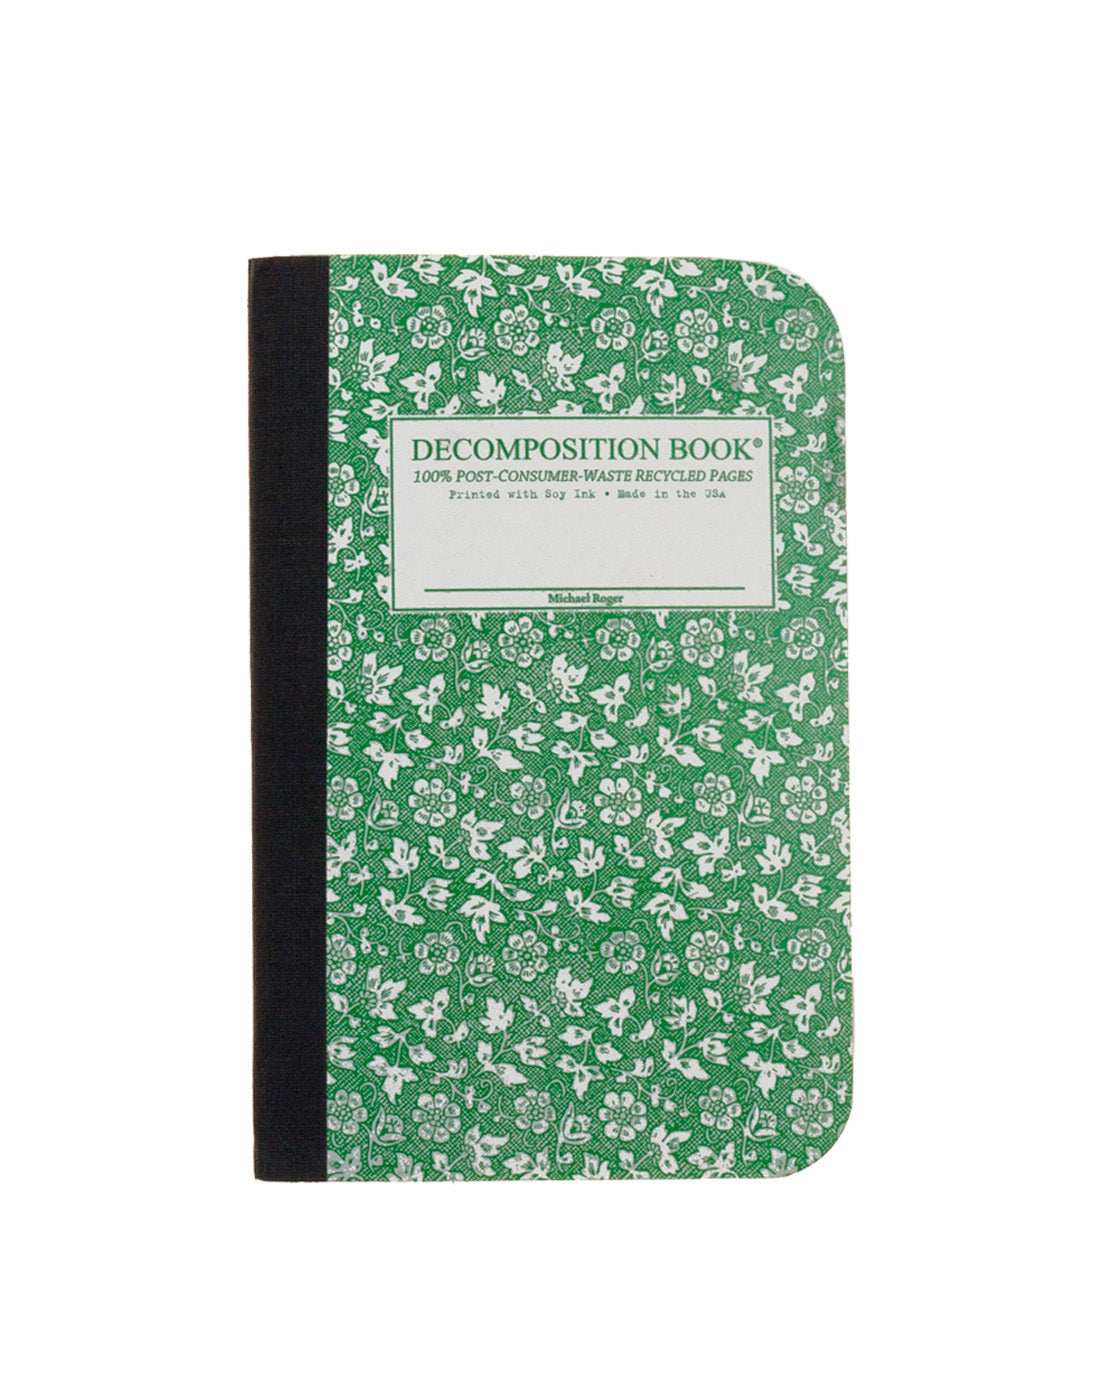 Sewn composition book printed with green flowers